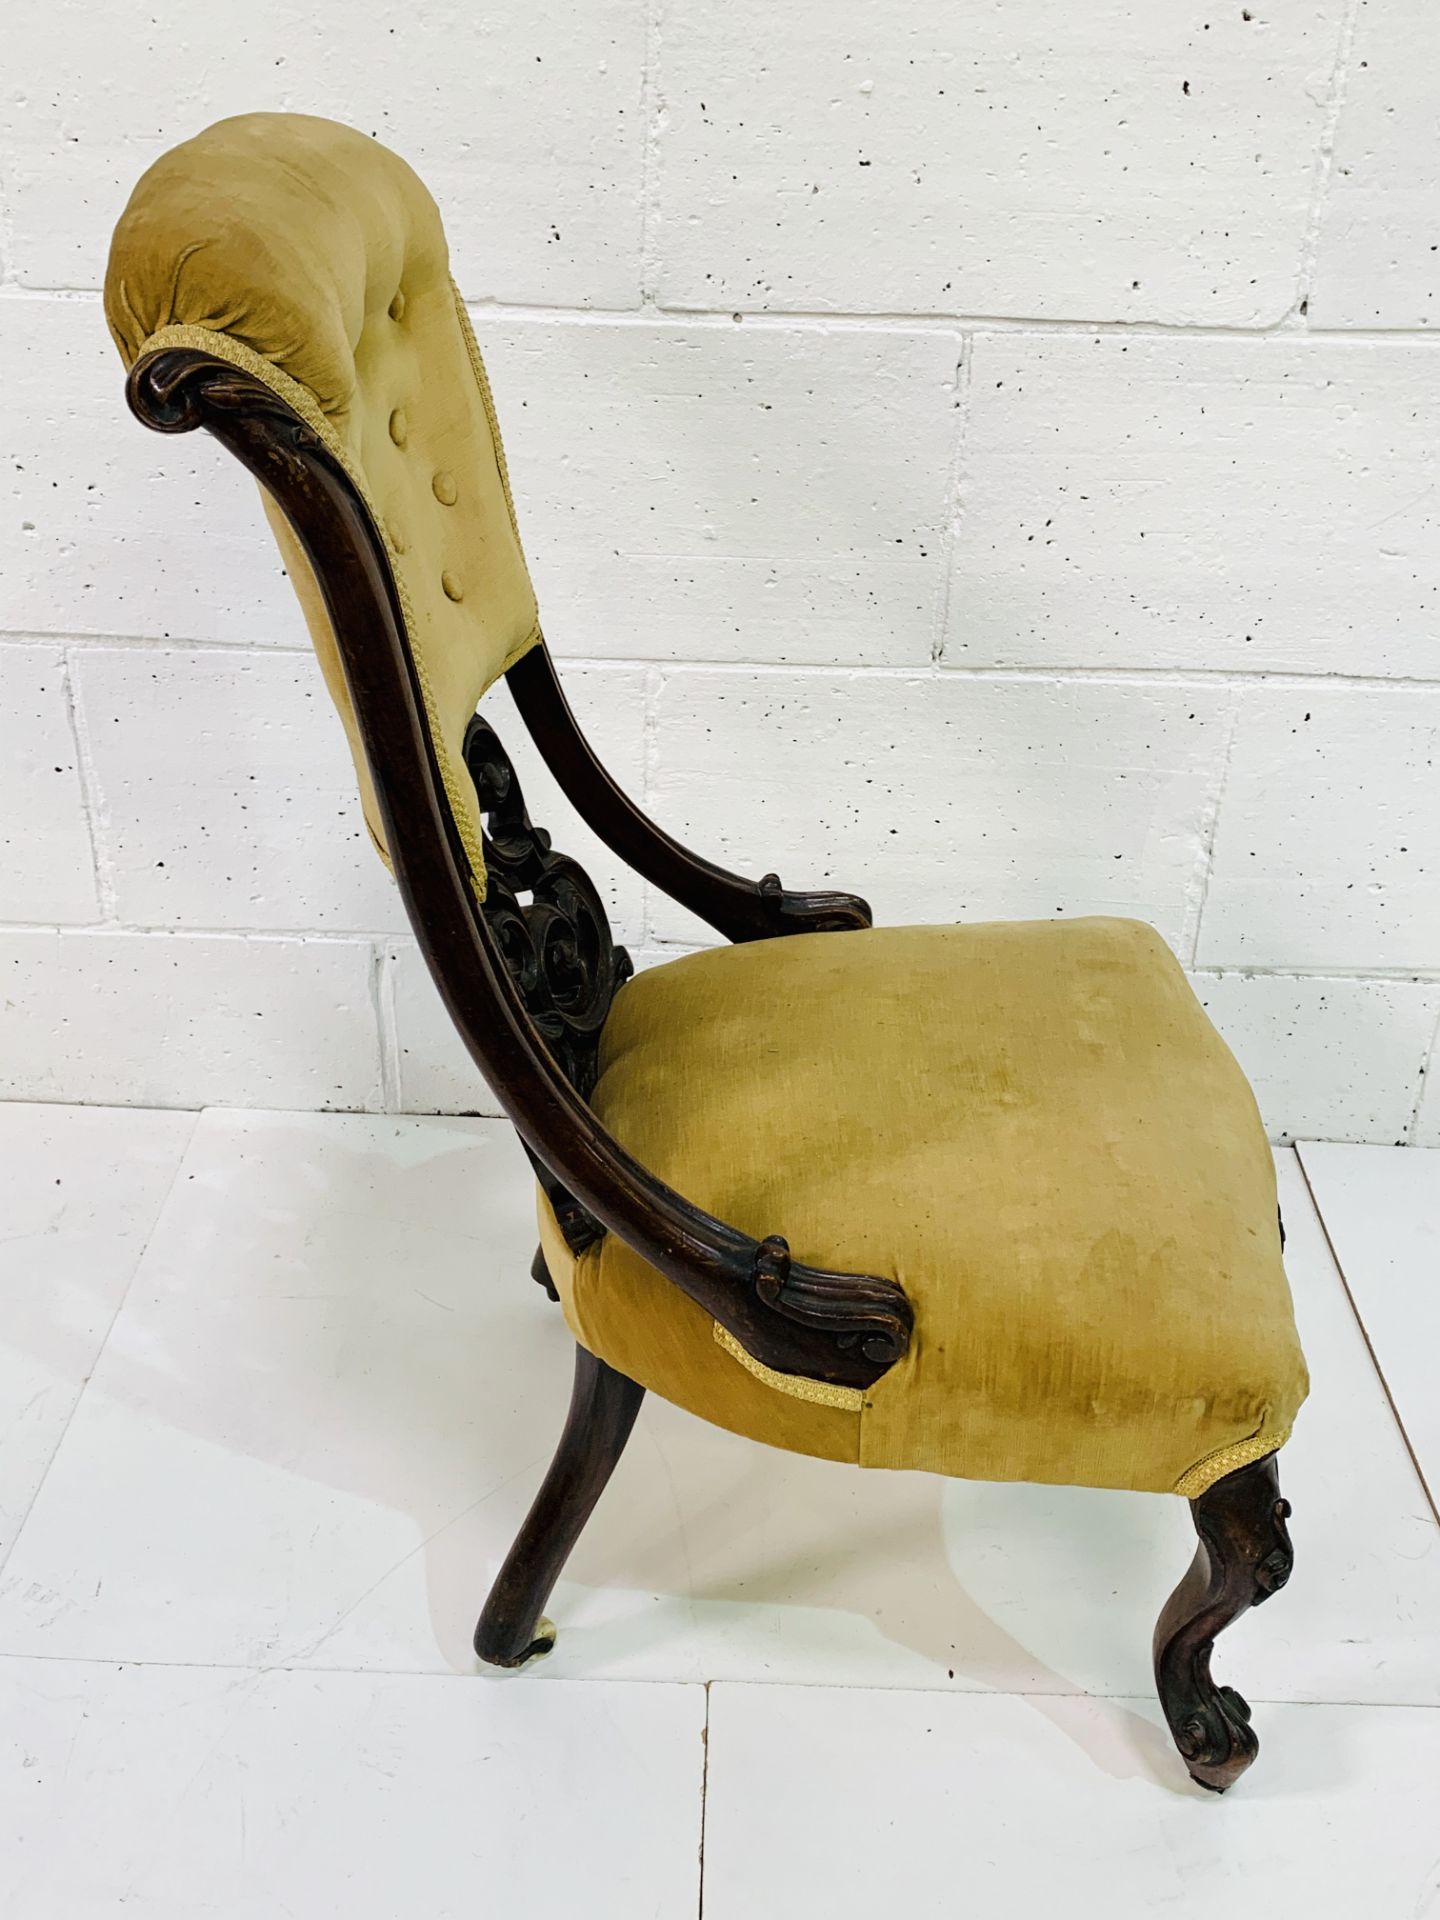 Ornately decorated mahogany framed drawing room chair with mustard yellow velvet upholstery. - Image 5 of 5